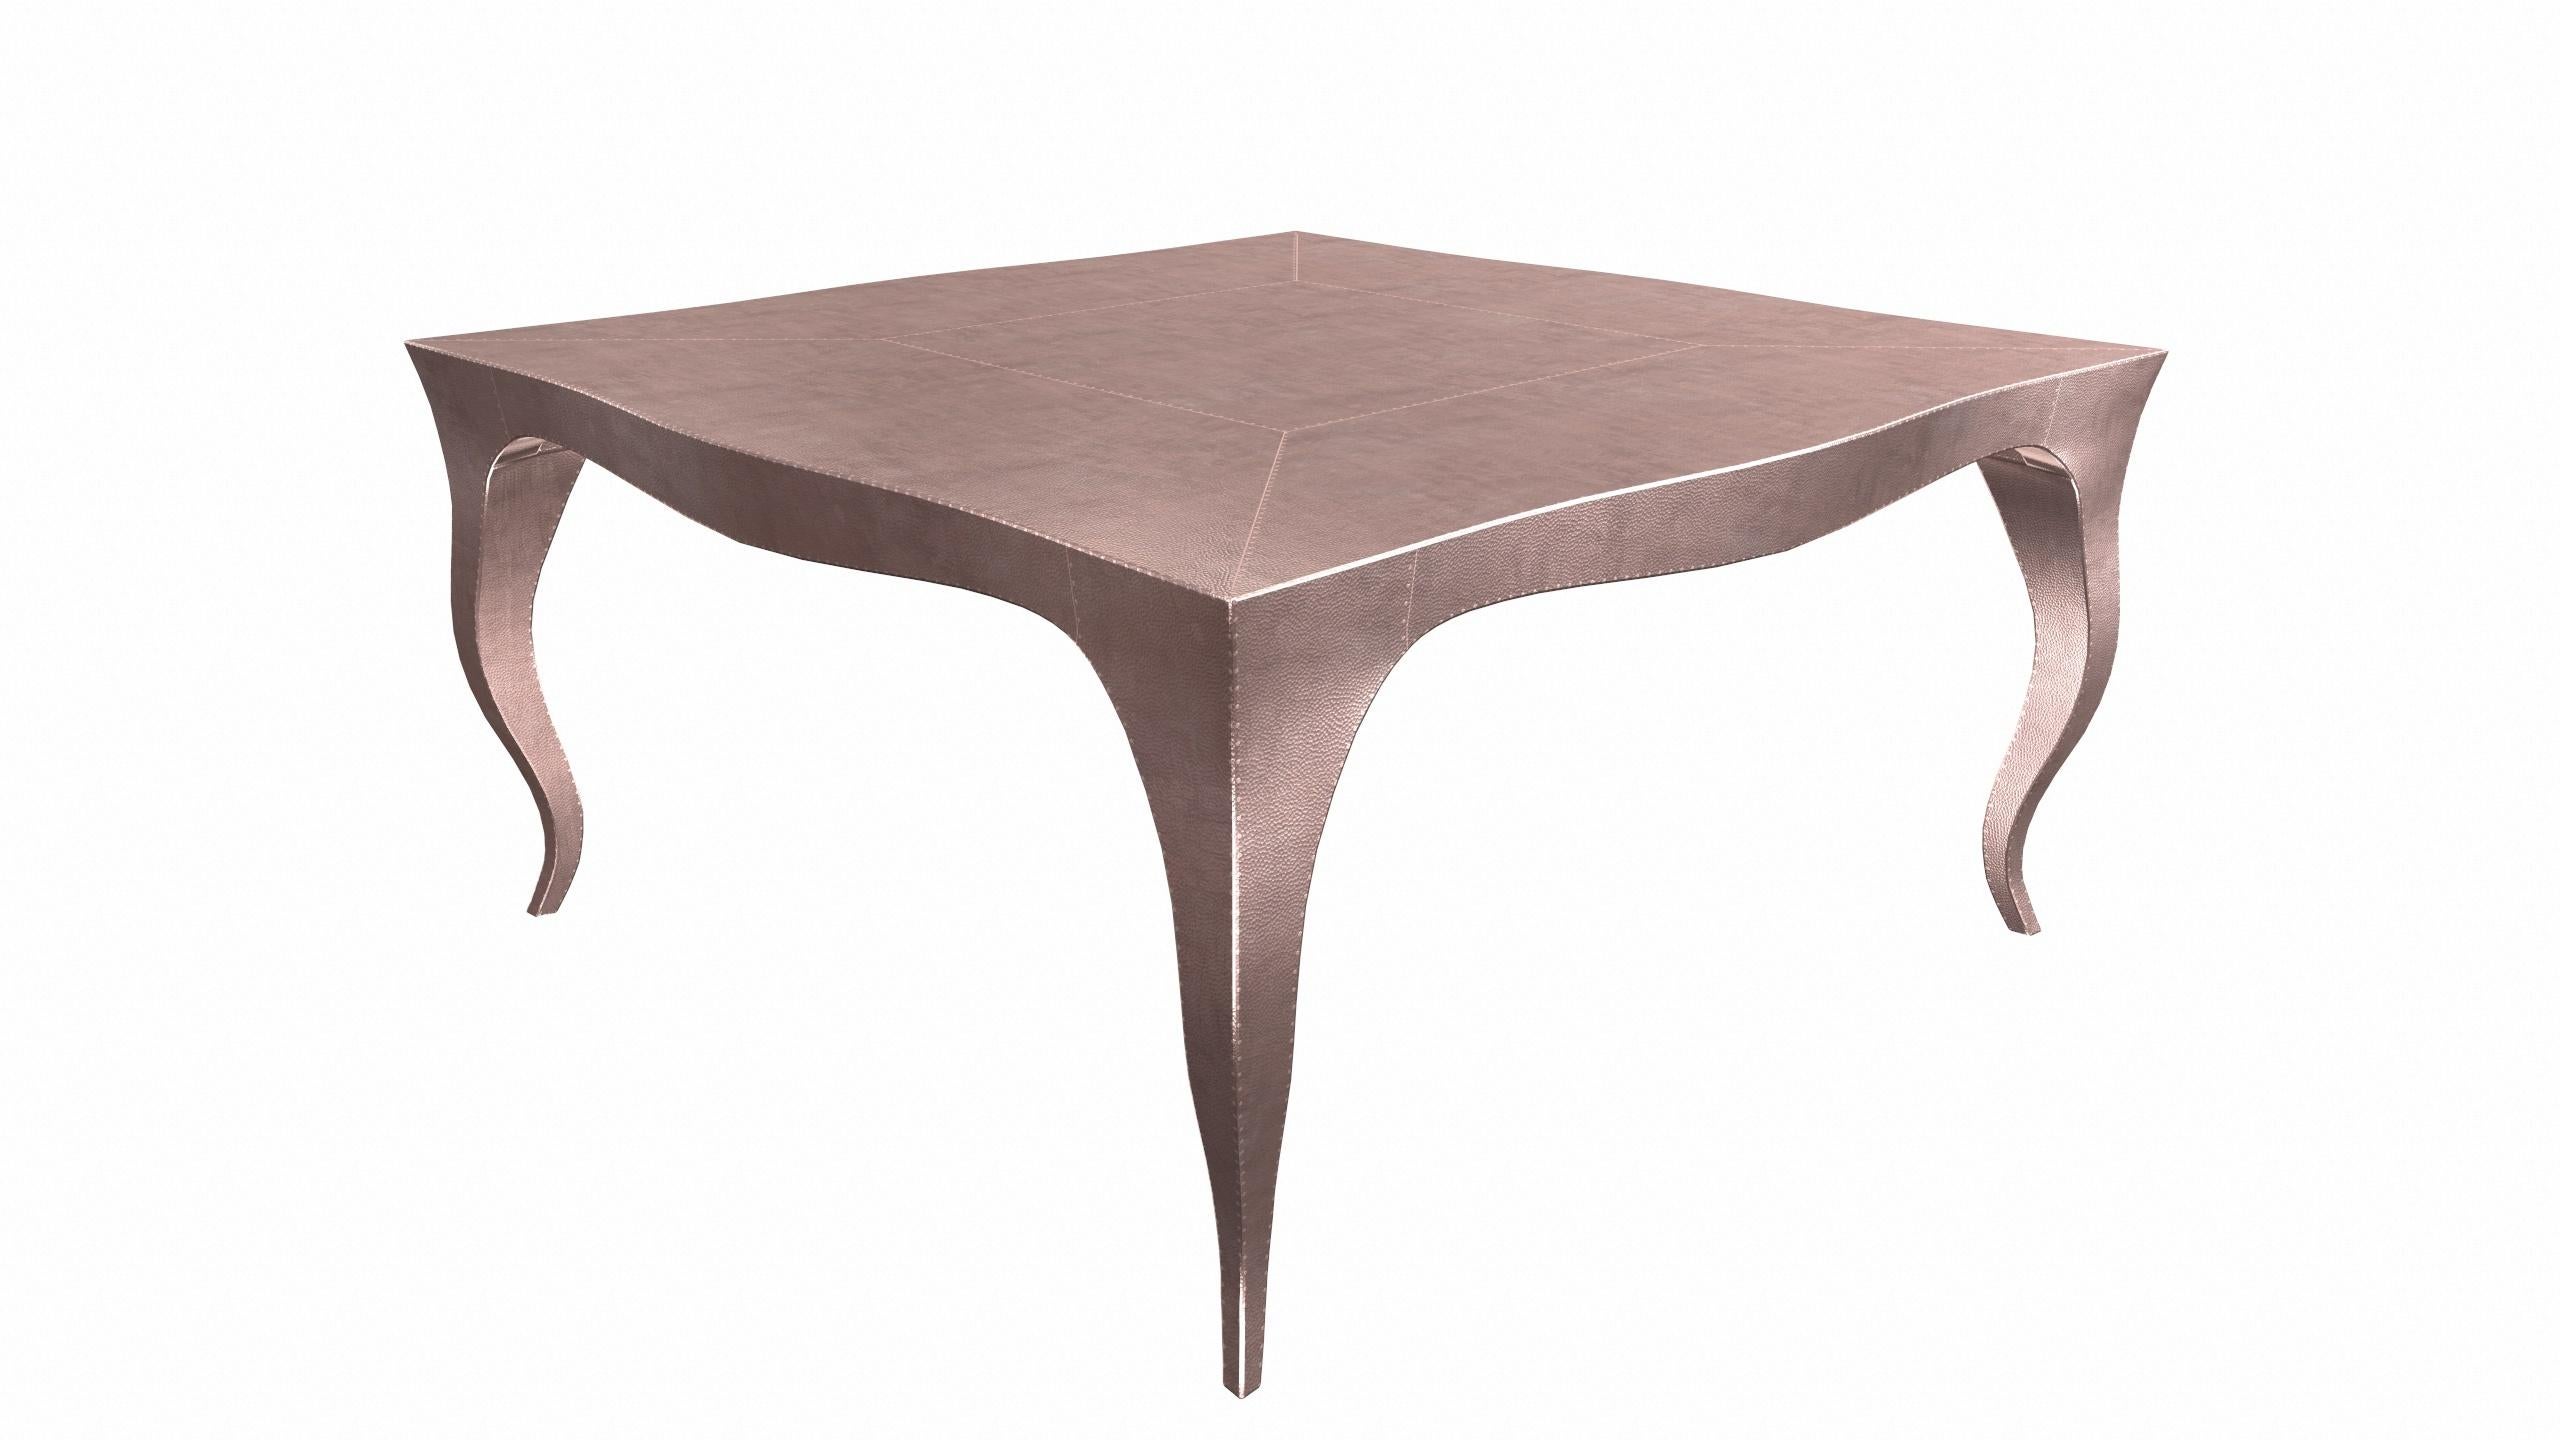 Other Louise Art Deco Center Tables Mid. Hammered Copper by Paul Mathieu for S.Odegard For Sale